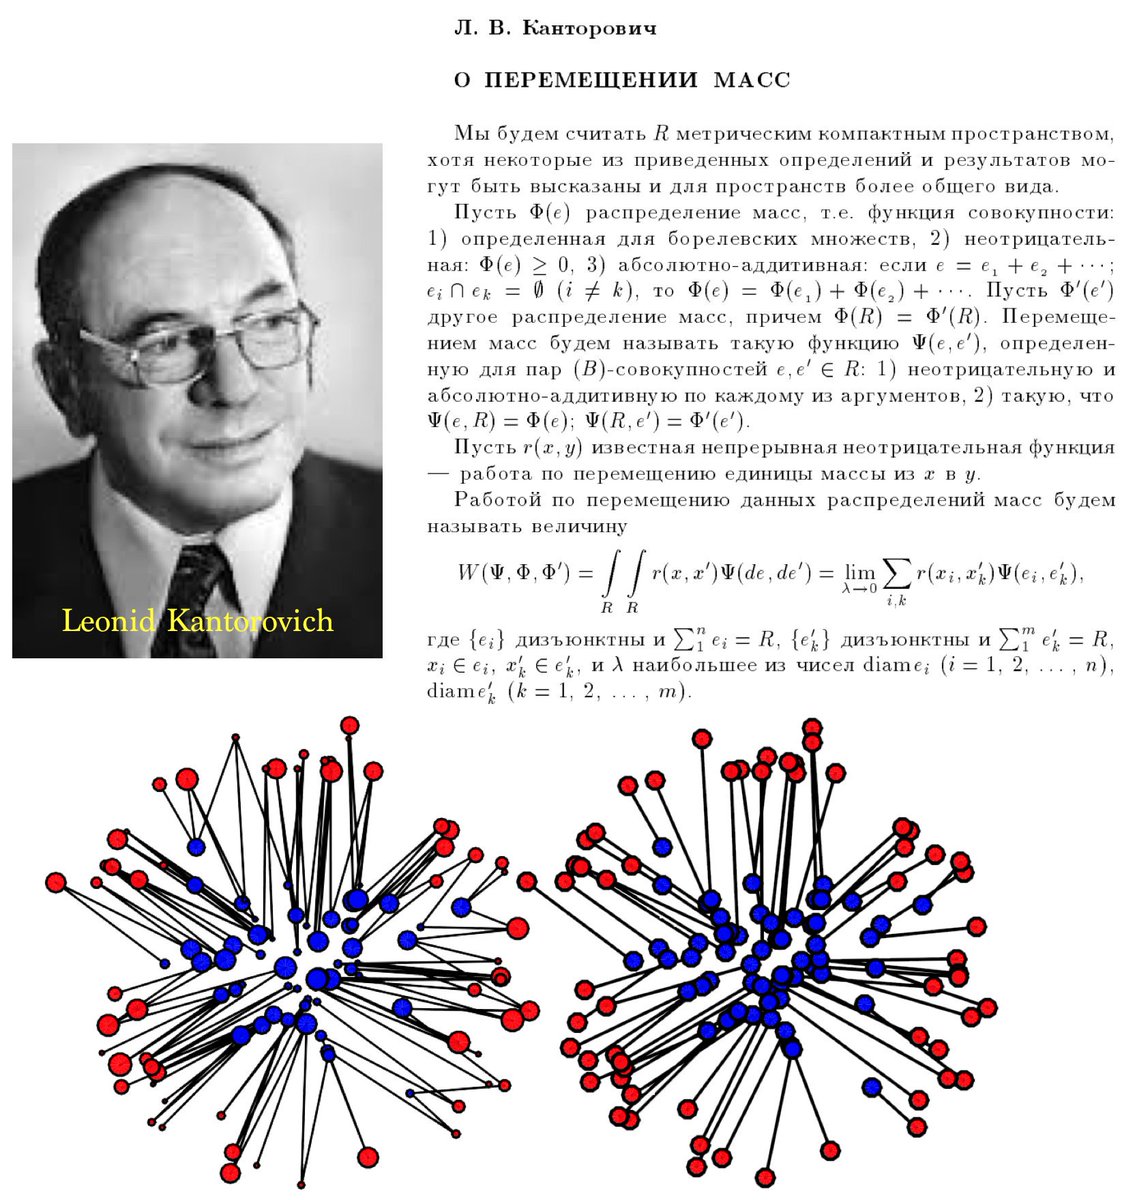 Gabriel Peyré on X: "Oldies but goldies: L. Kantorovich, On translocation  of masses, 1942. "Nobel" Prize in economic 75 for optimal transport as a  convex linear program. Makes the transport problem formulated